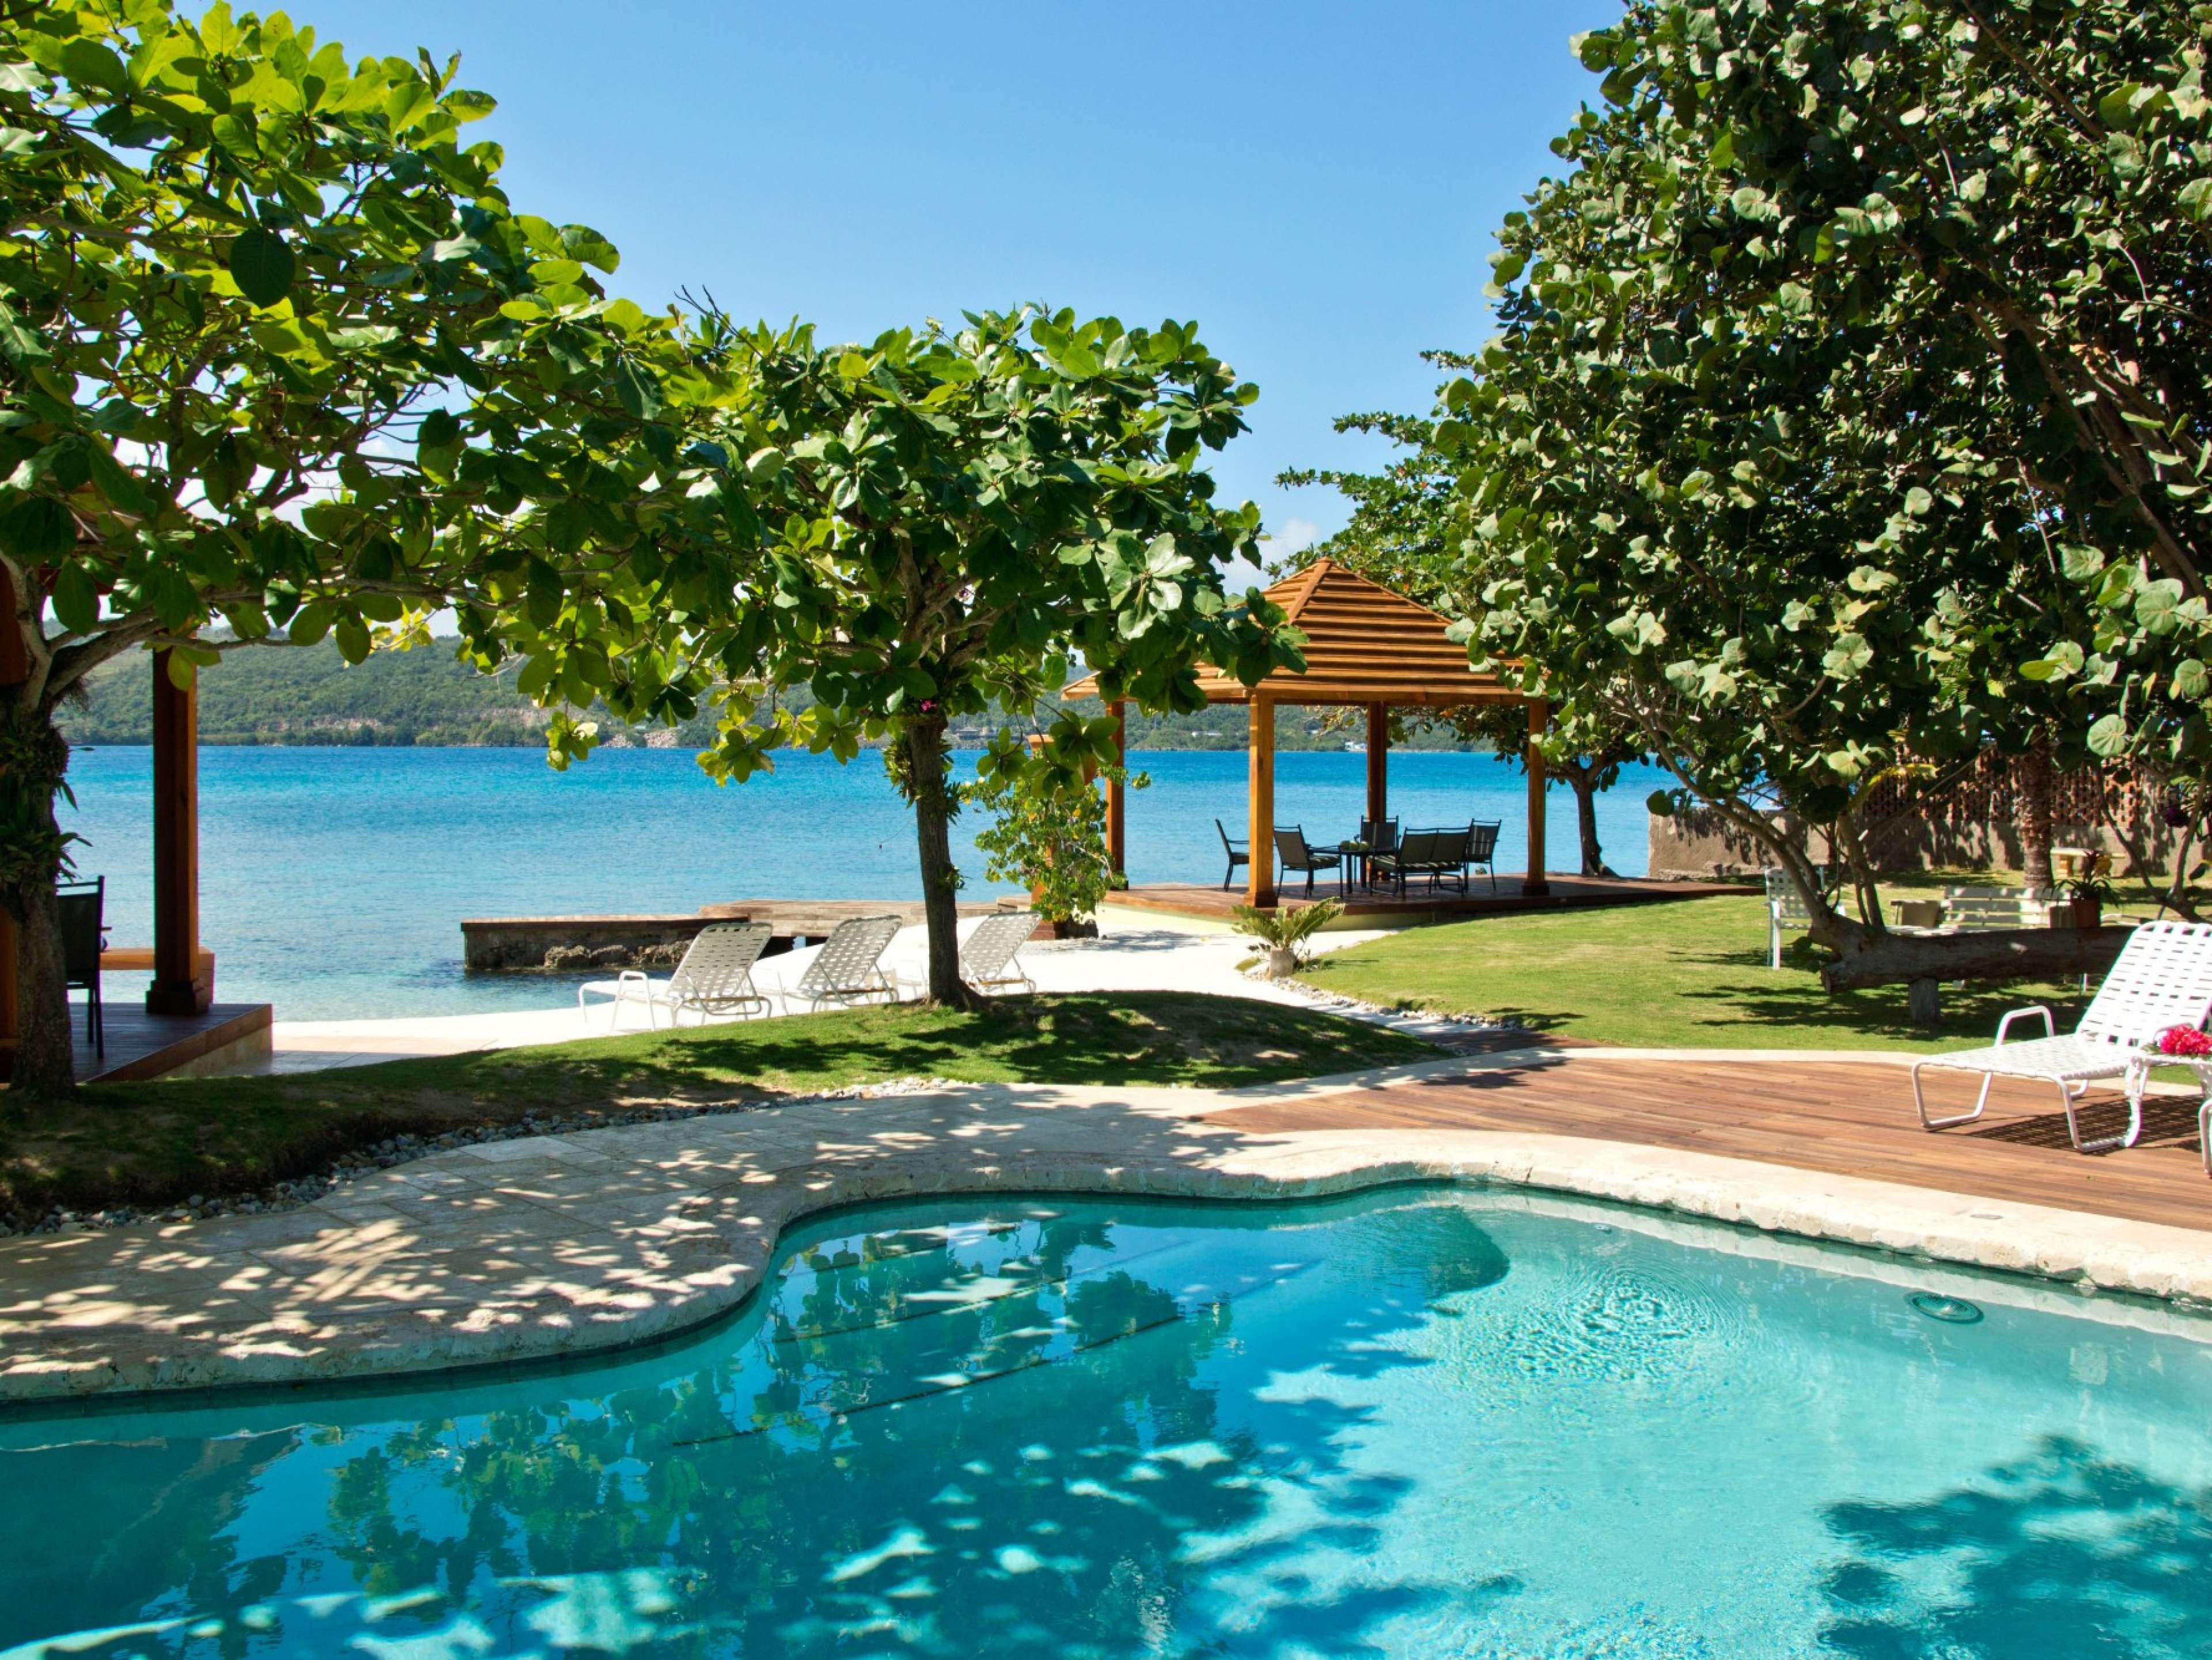 Sea Grapes On The Beach villas in Jamaica with private pools